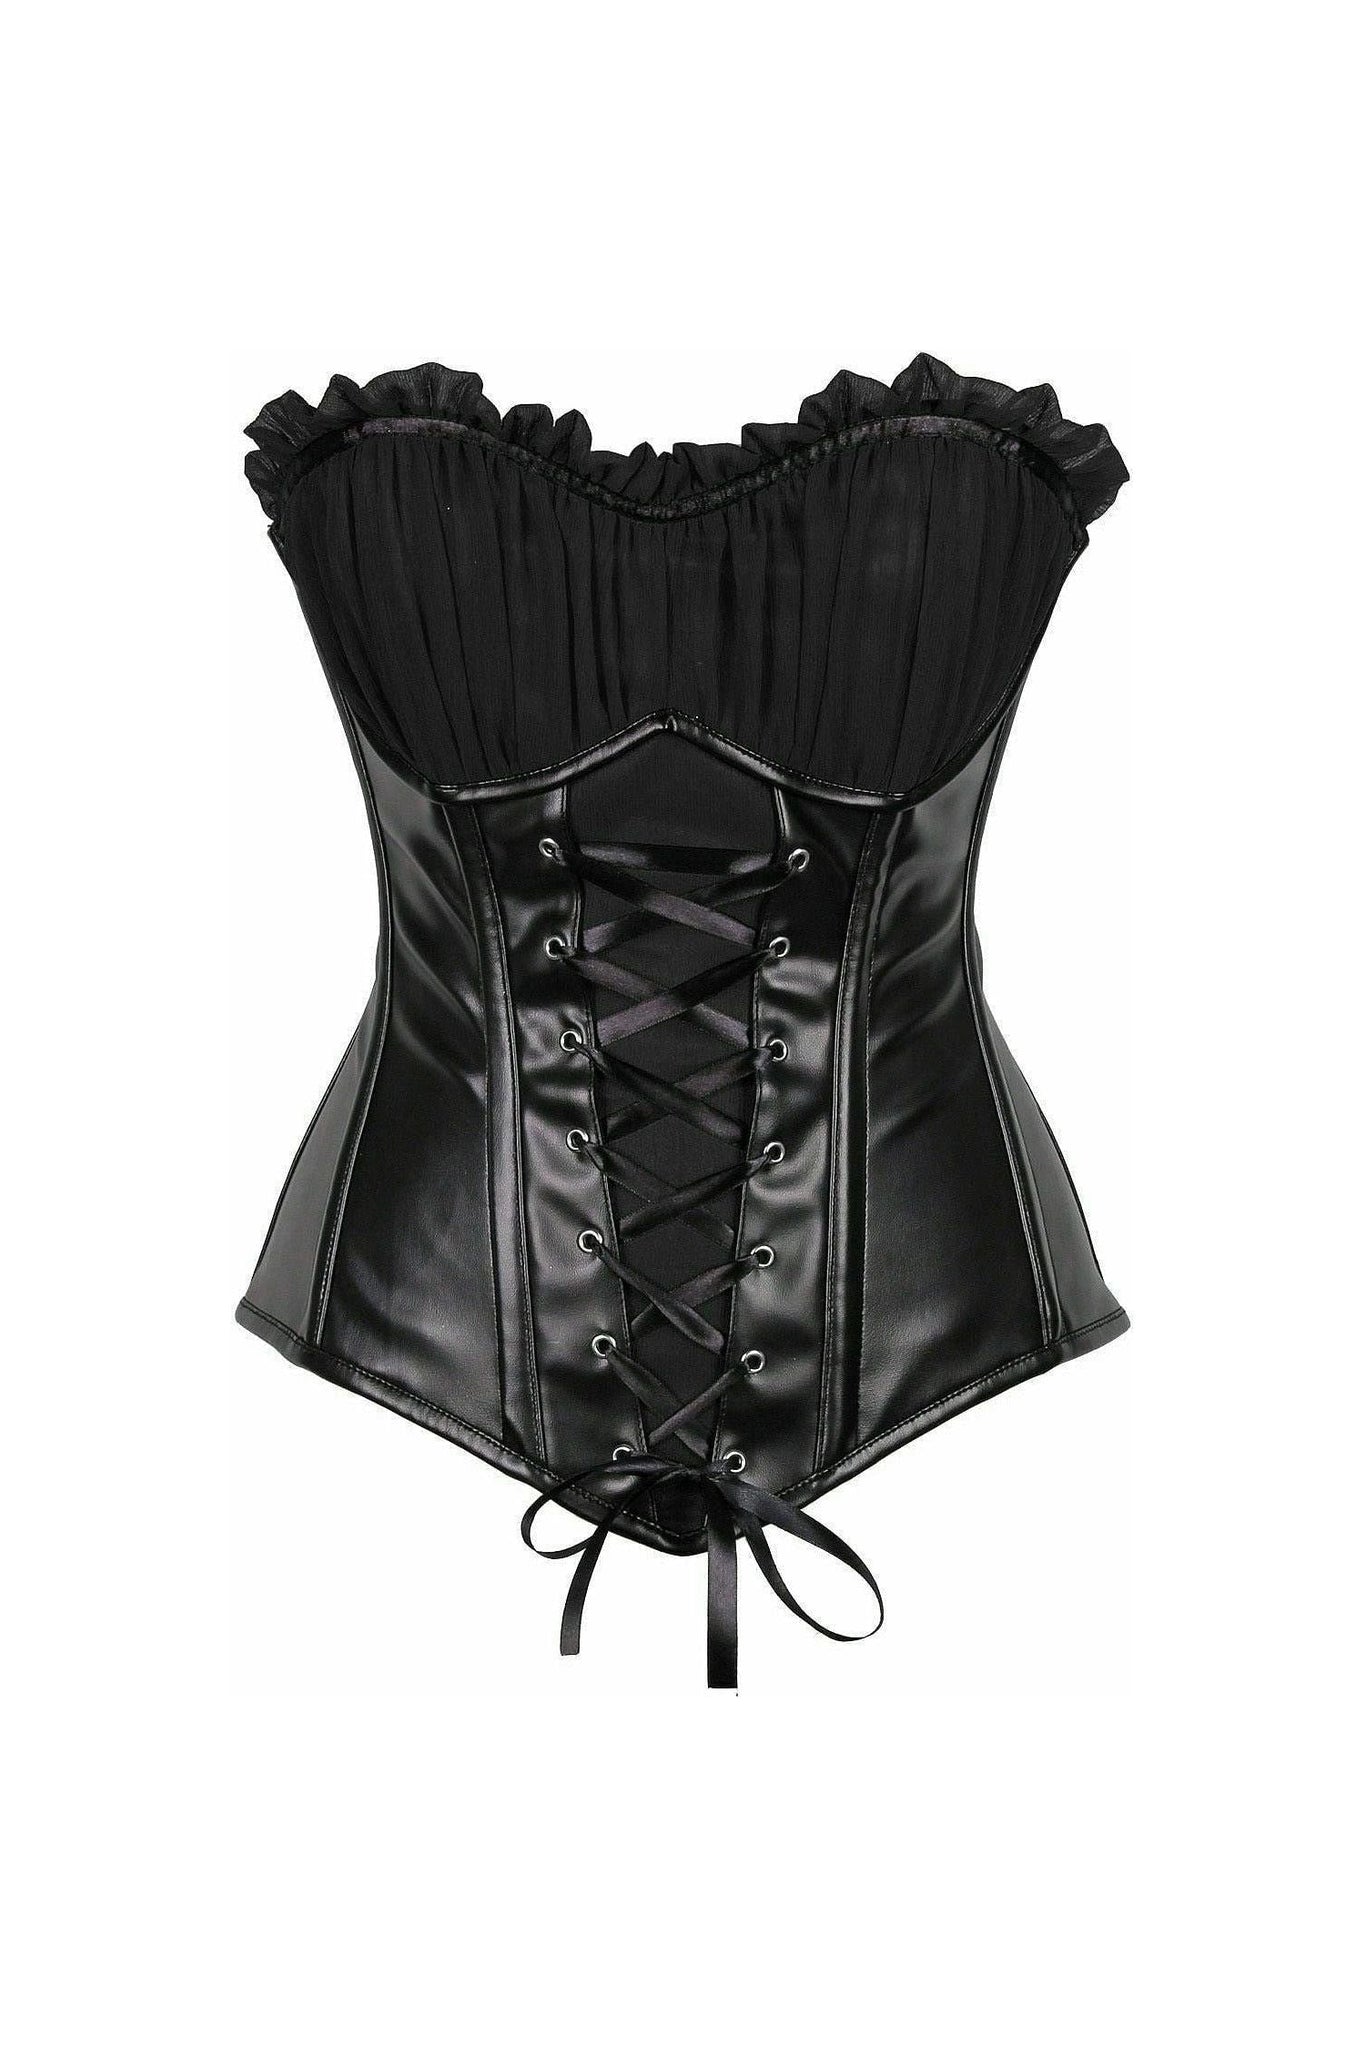 Top Drawer Black Faux Leather Lace-Up Steel Boned Corset - Daisy Corsets